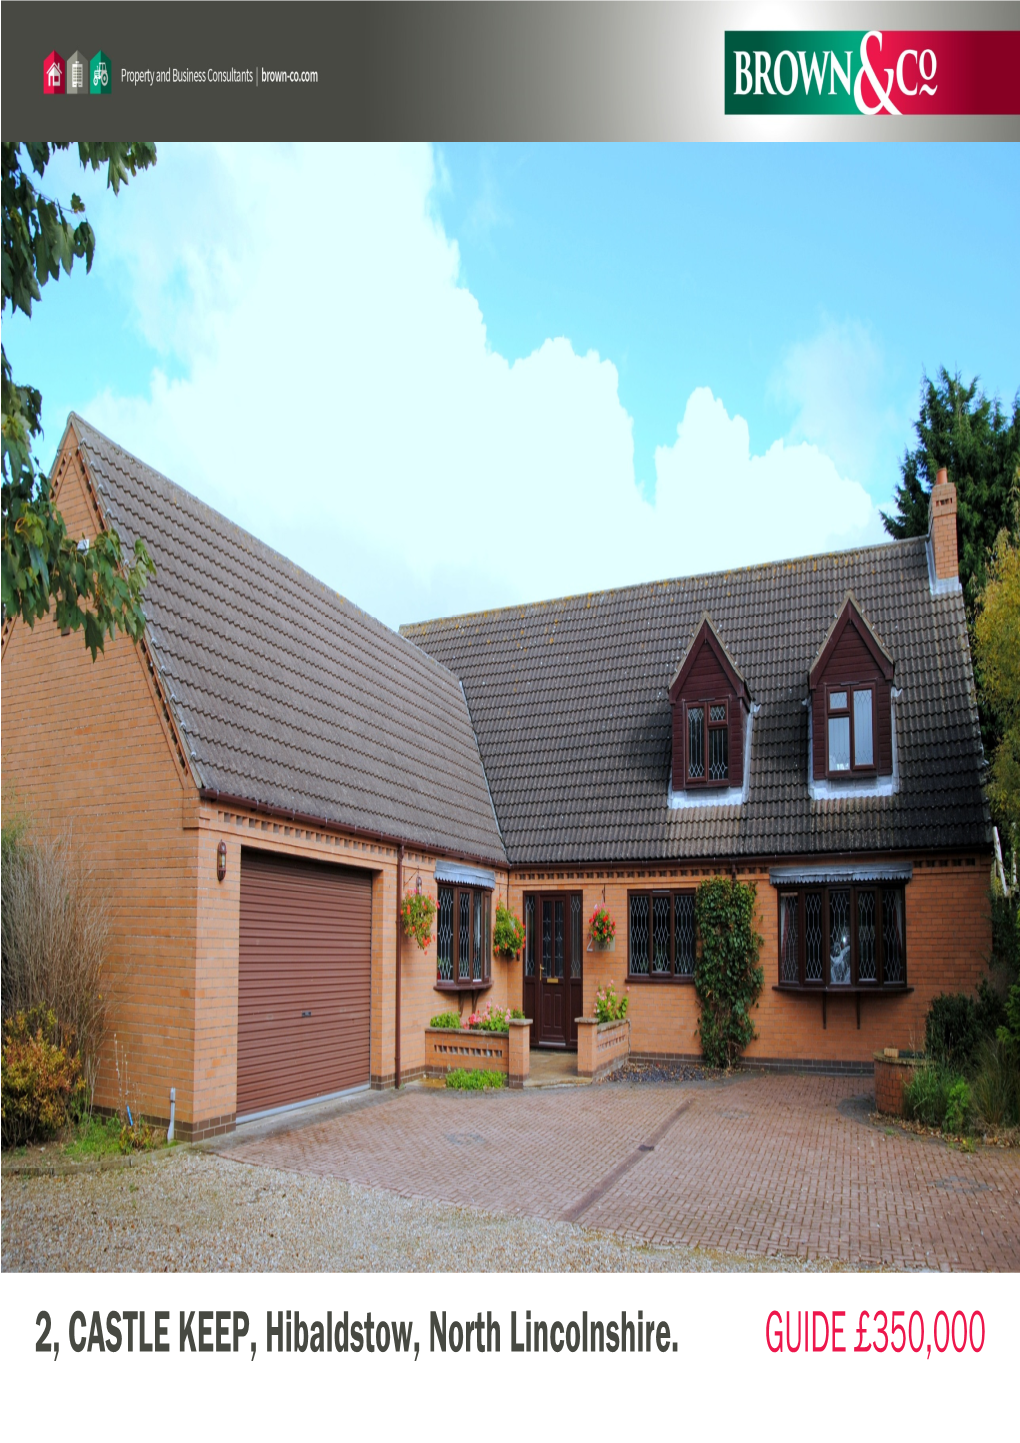 2, CASTLE KEEP, Hibaldstow, North Lincolnshire. GUIDE £ 350,000